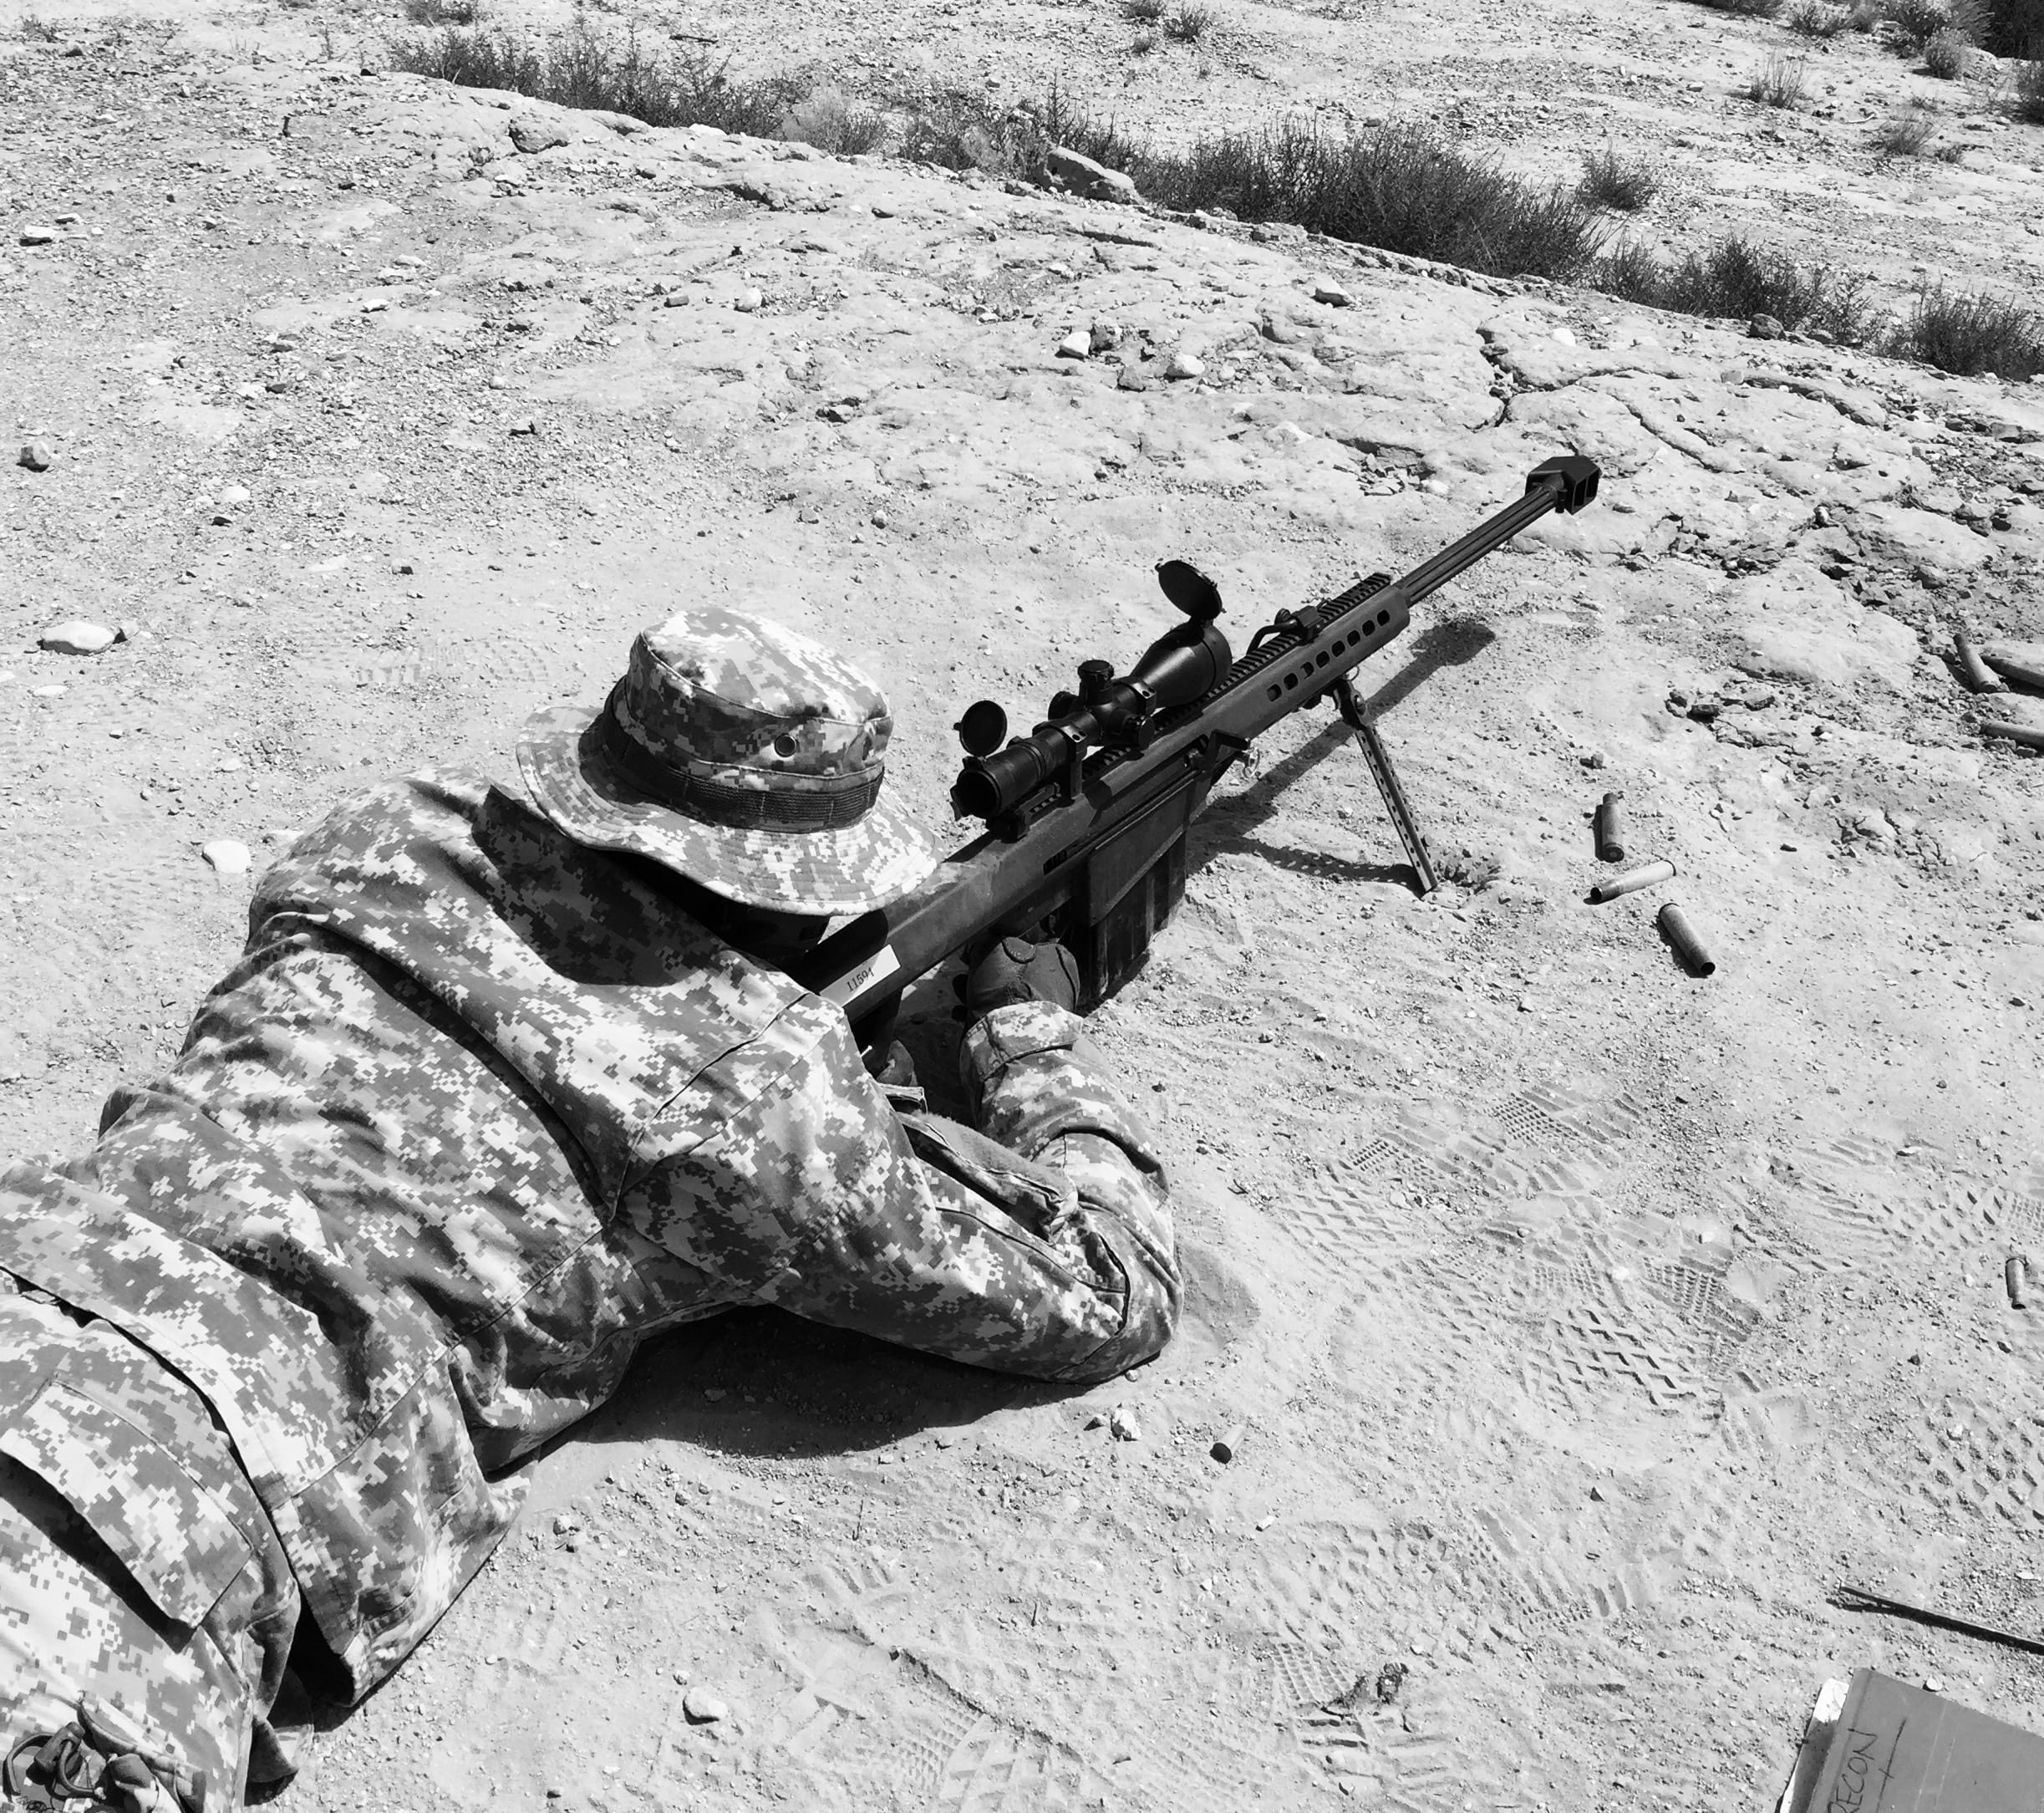 Lying in sand aiming with sniper rifle